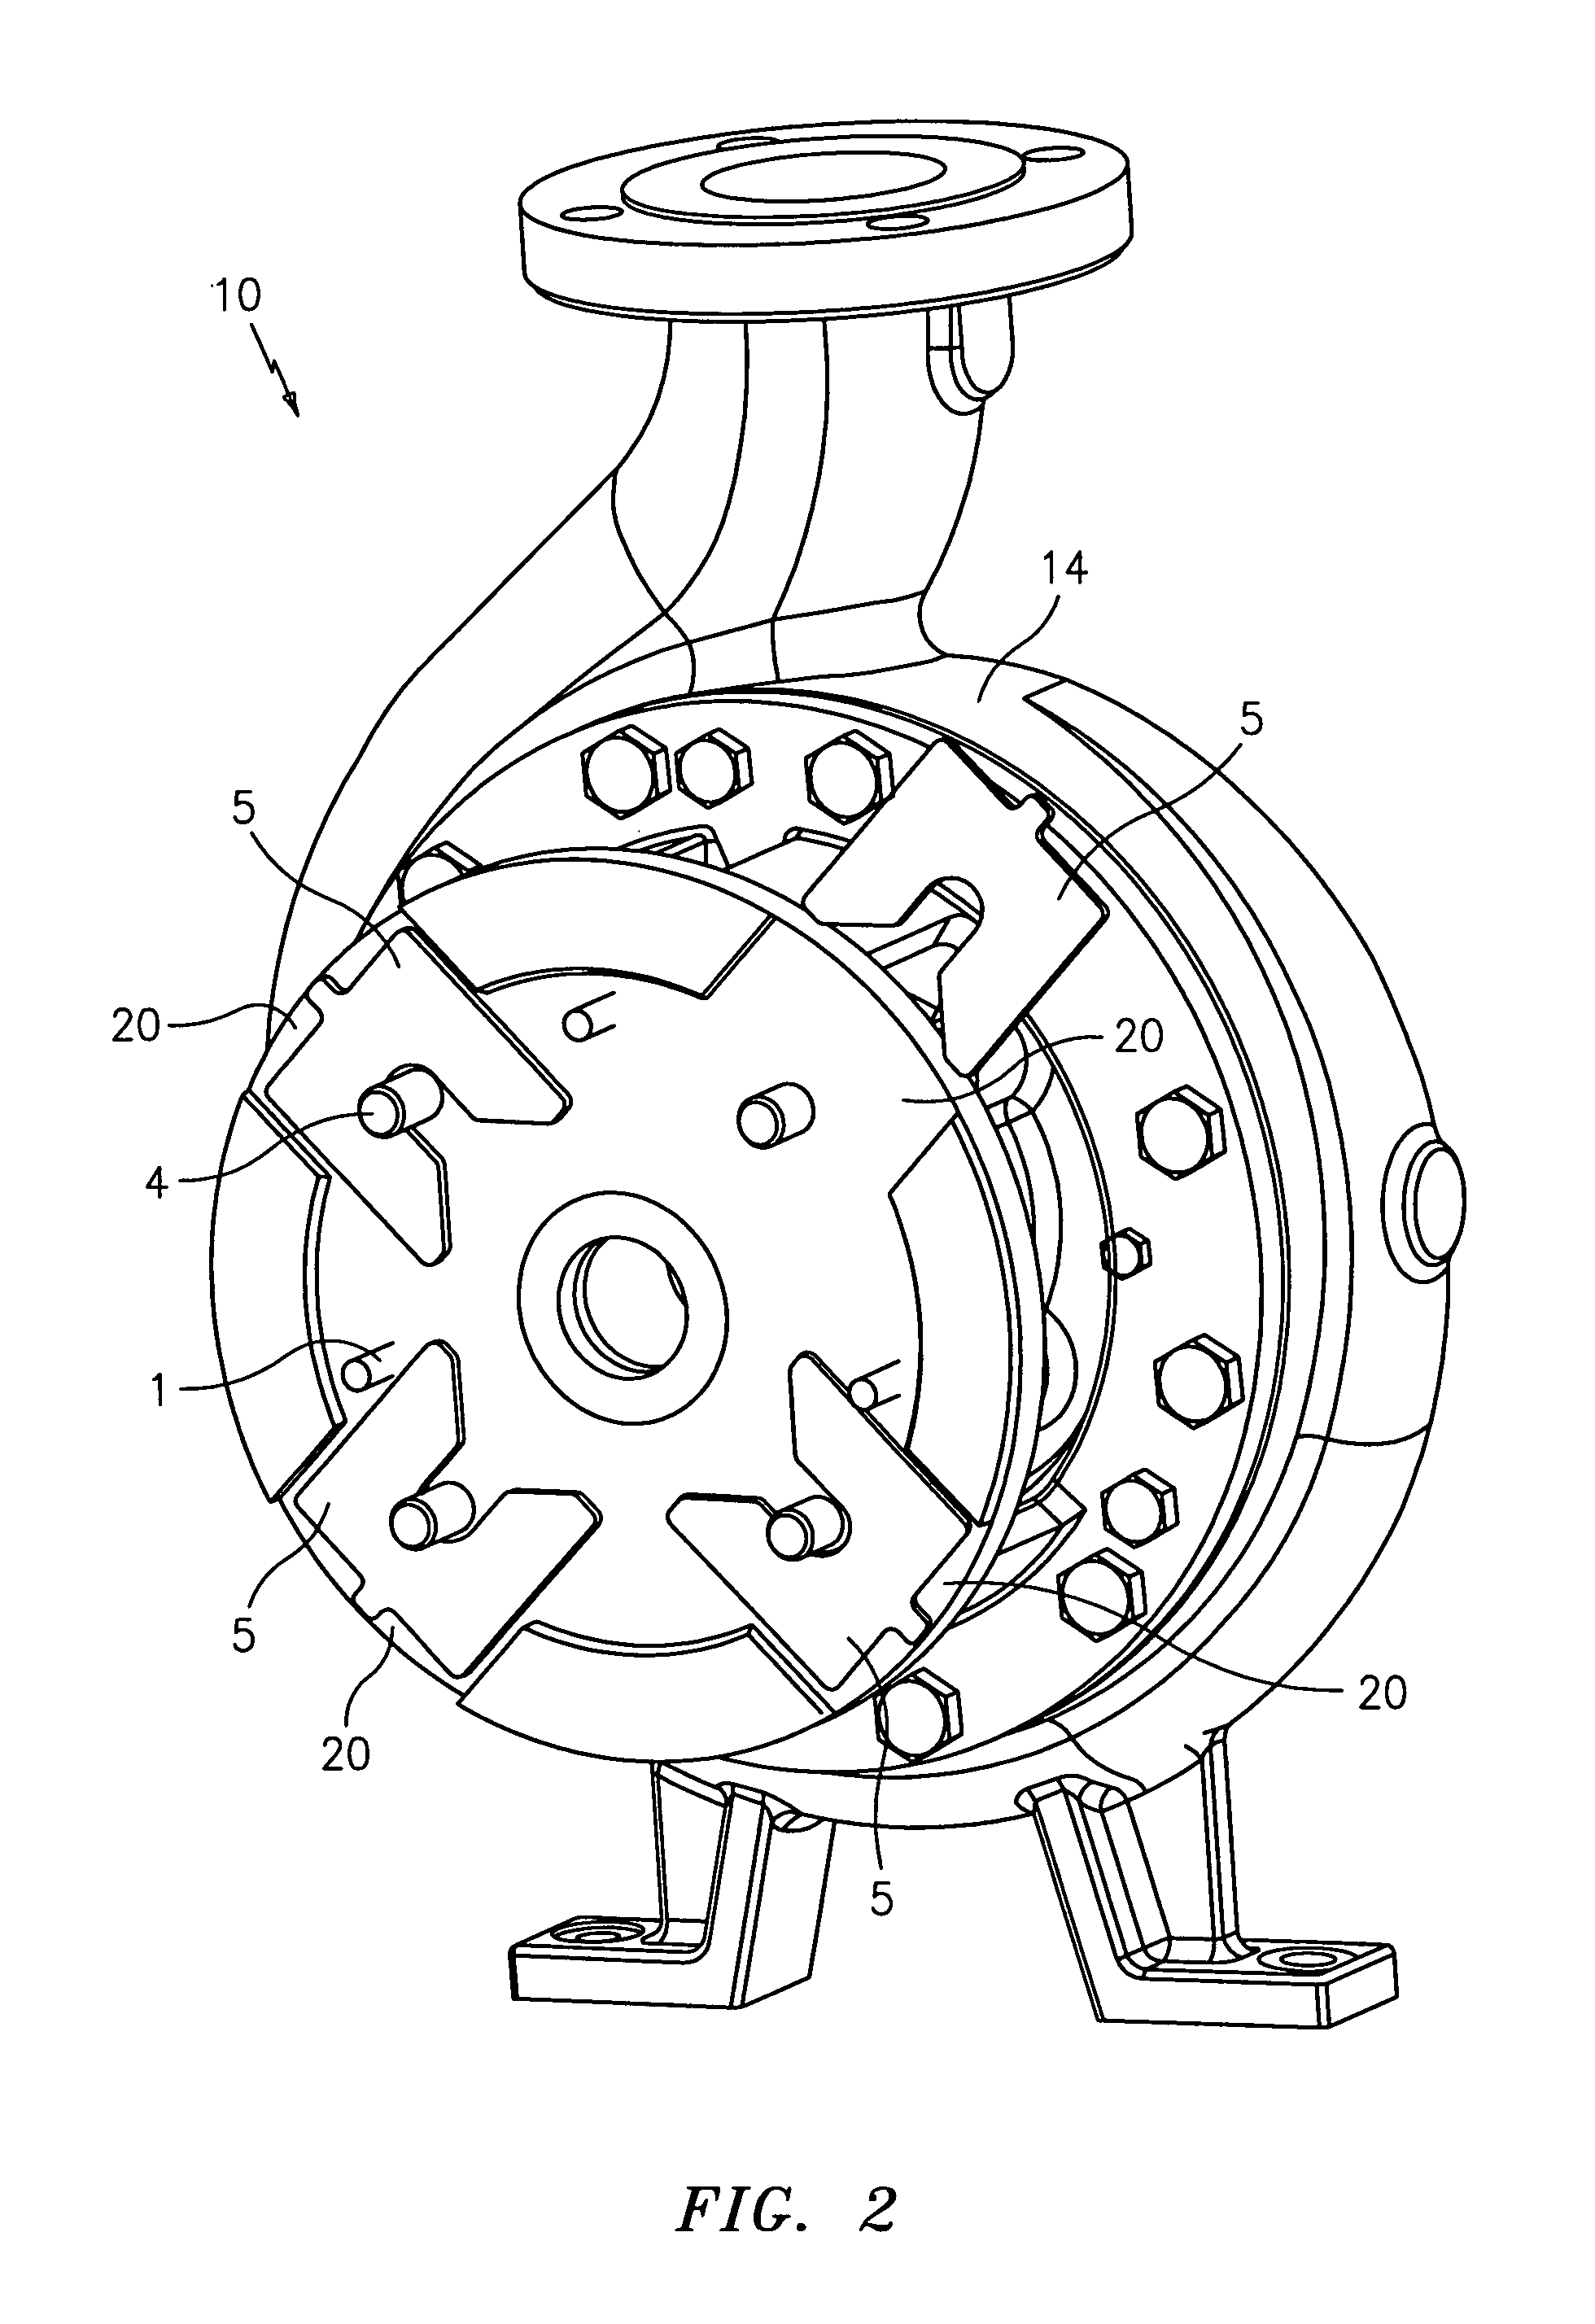 Impeller adjustment device and method for doing the same for close coupled pumps